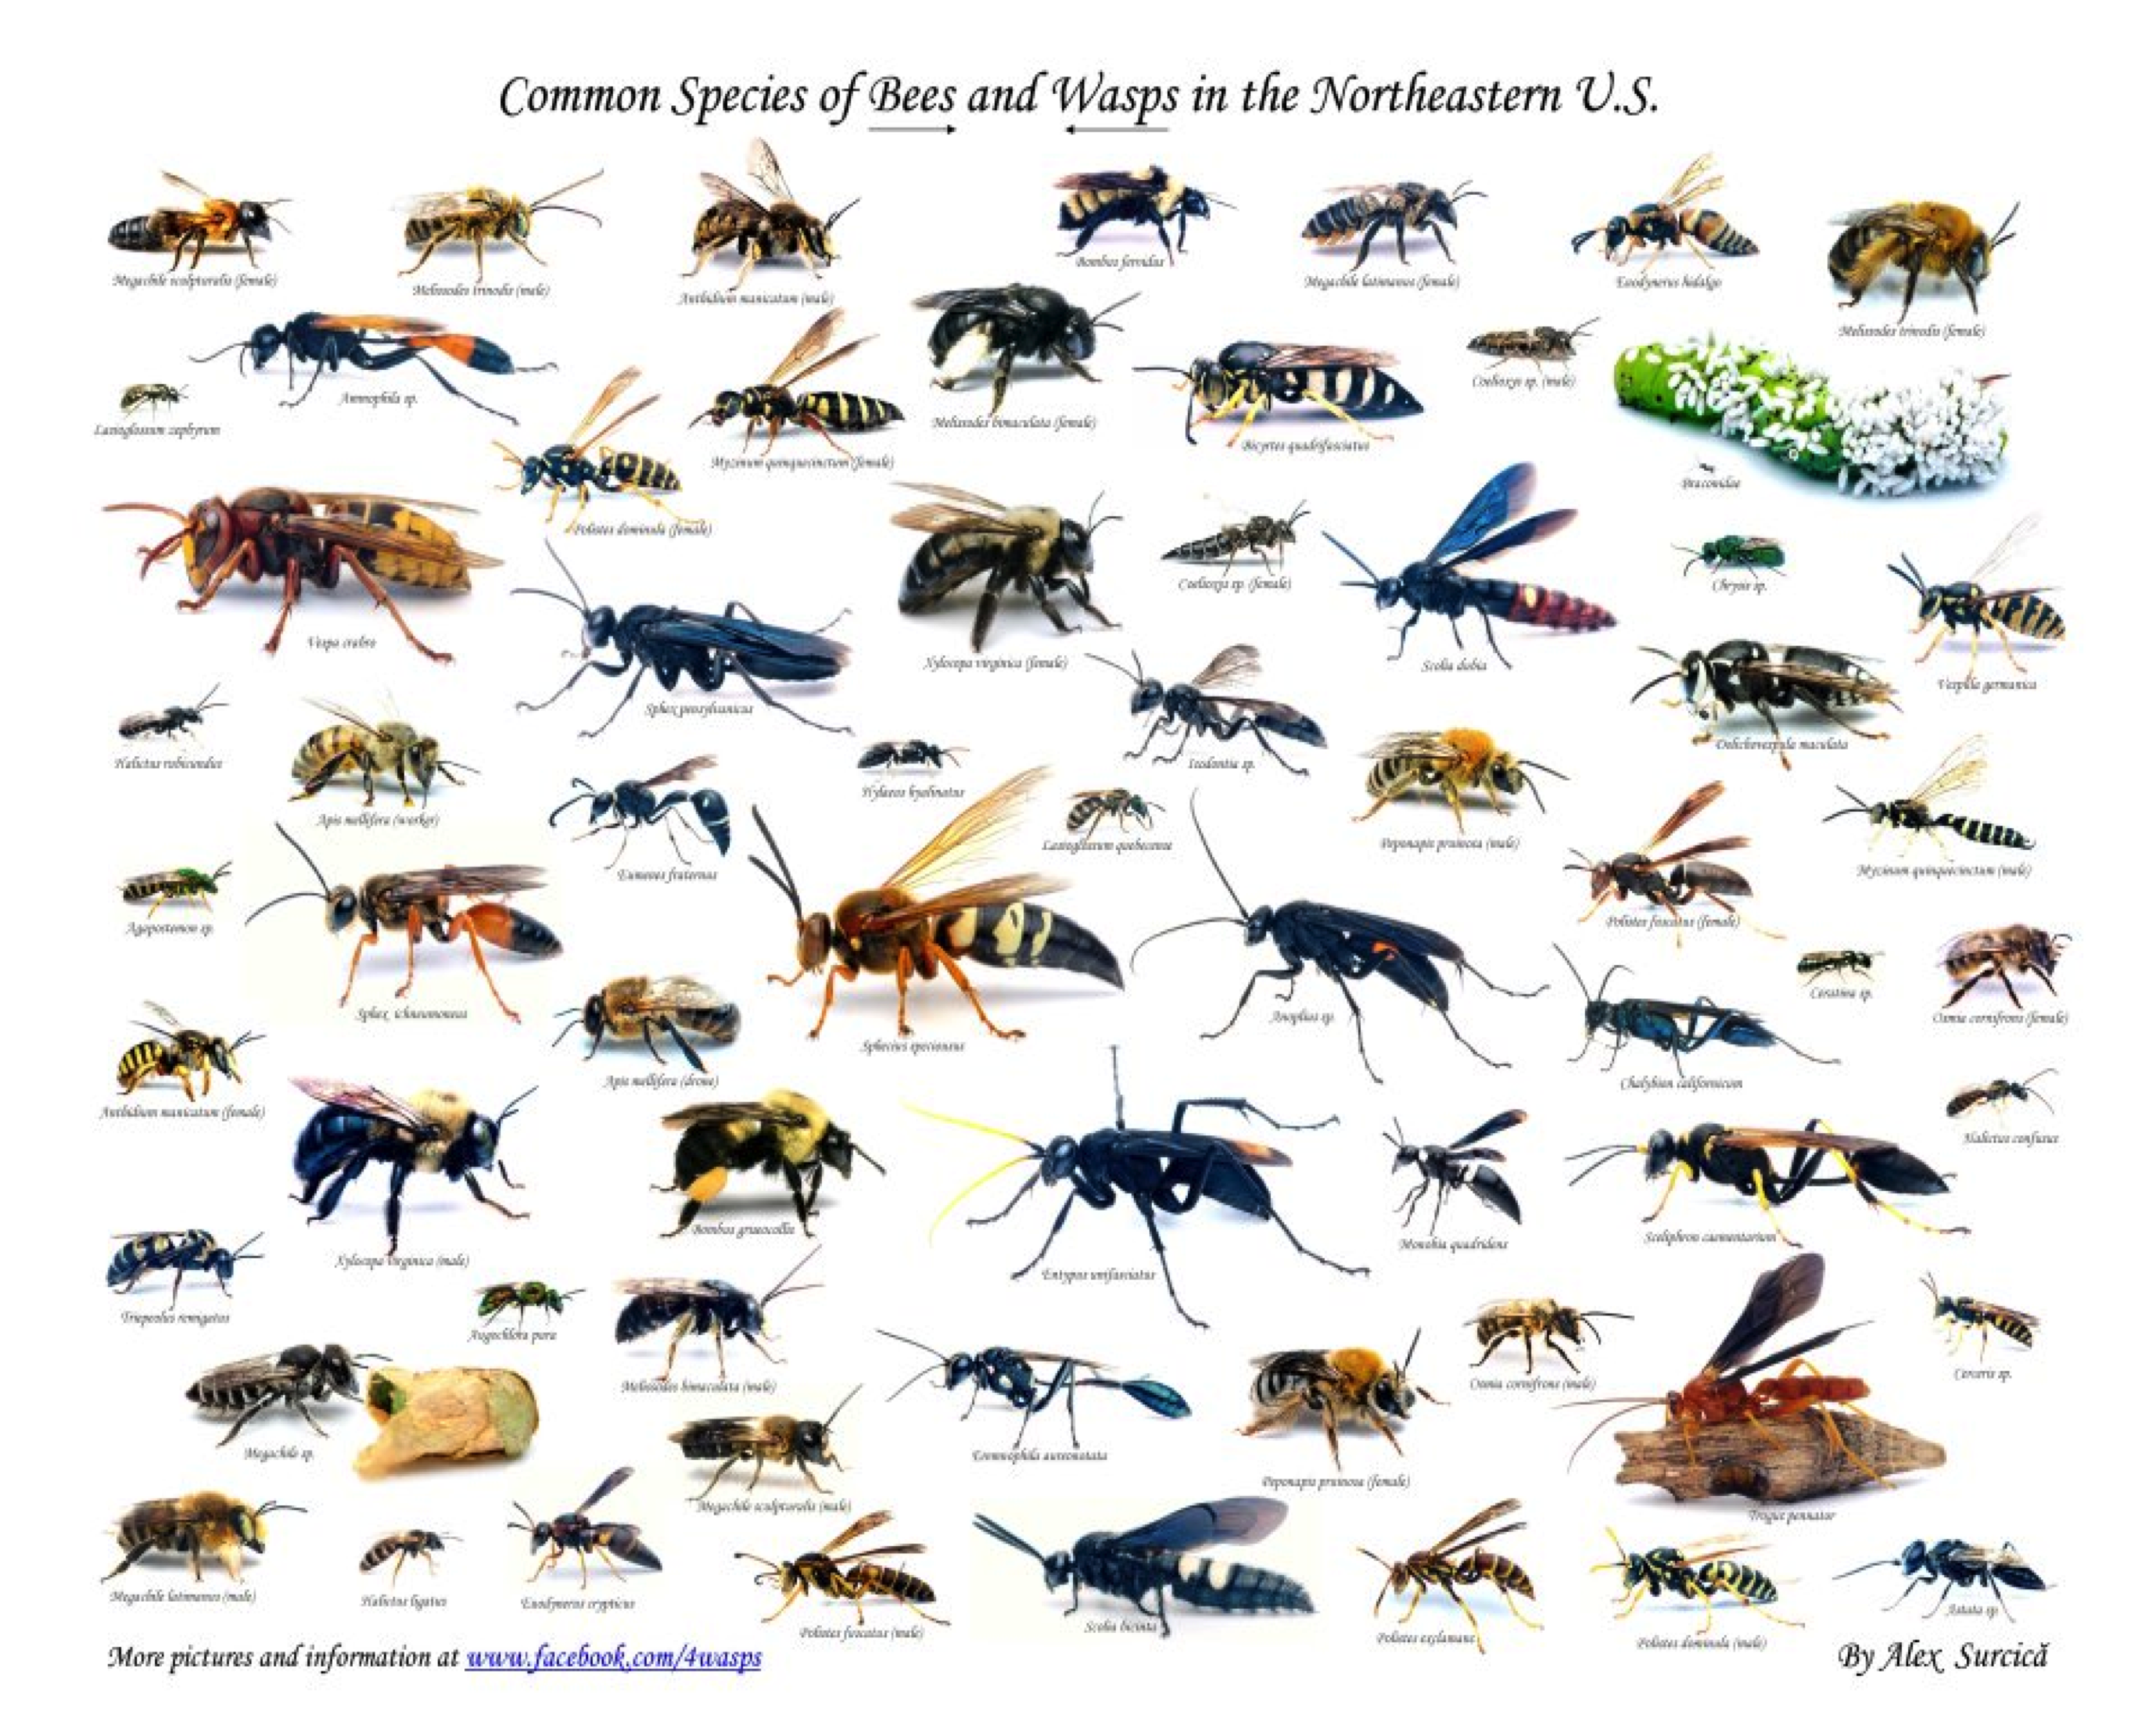 pic of different bees